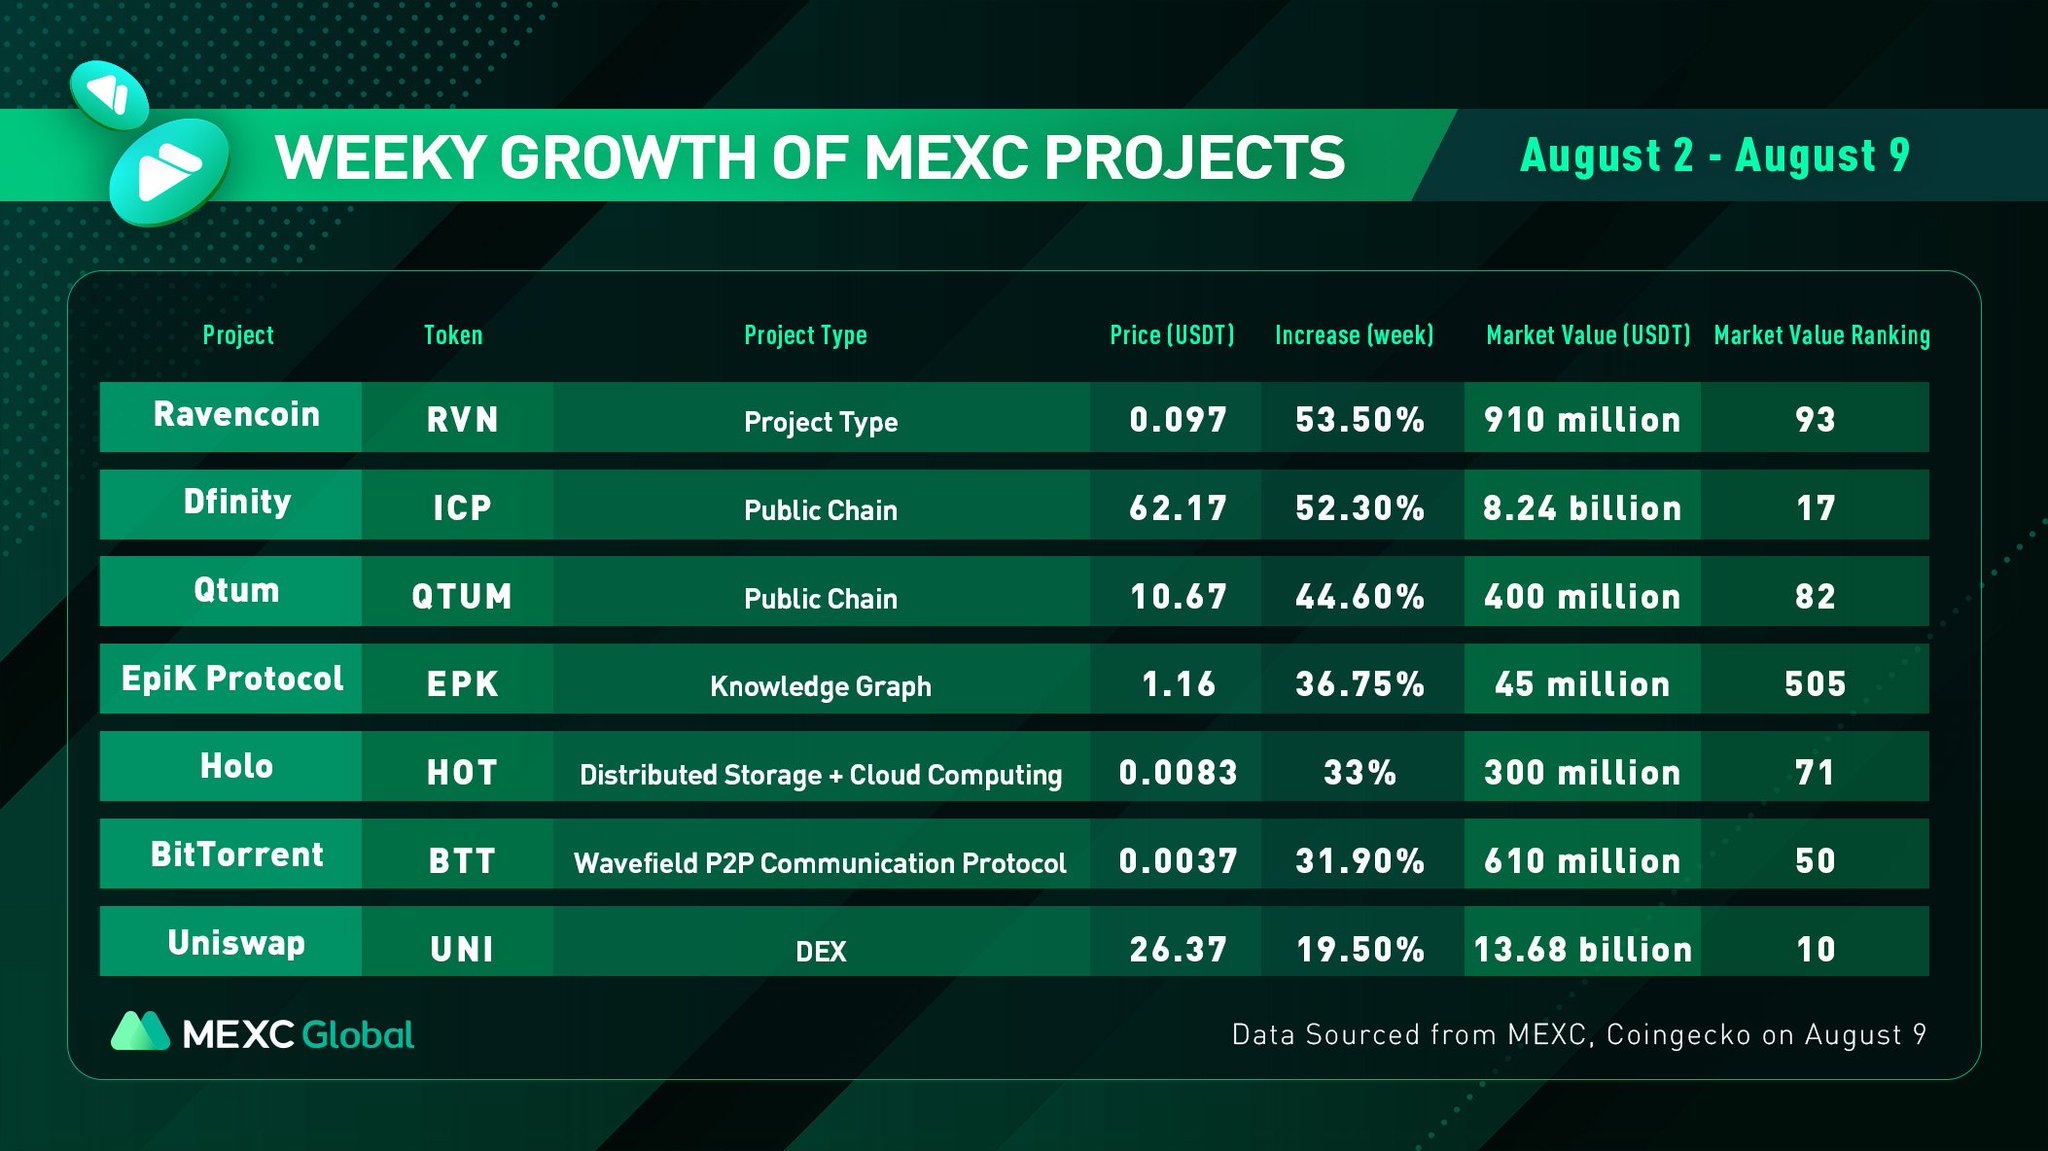 MEXC Global on Twitter: "Check out the weekly growth of ...